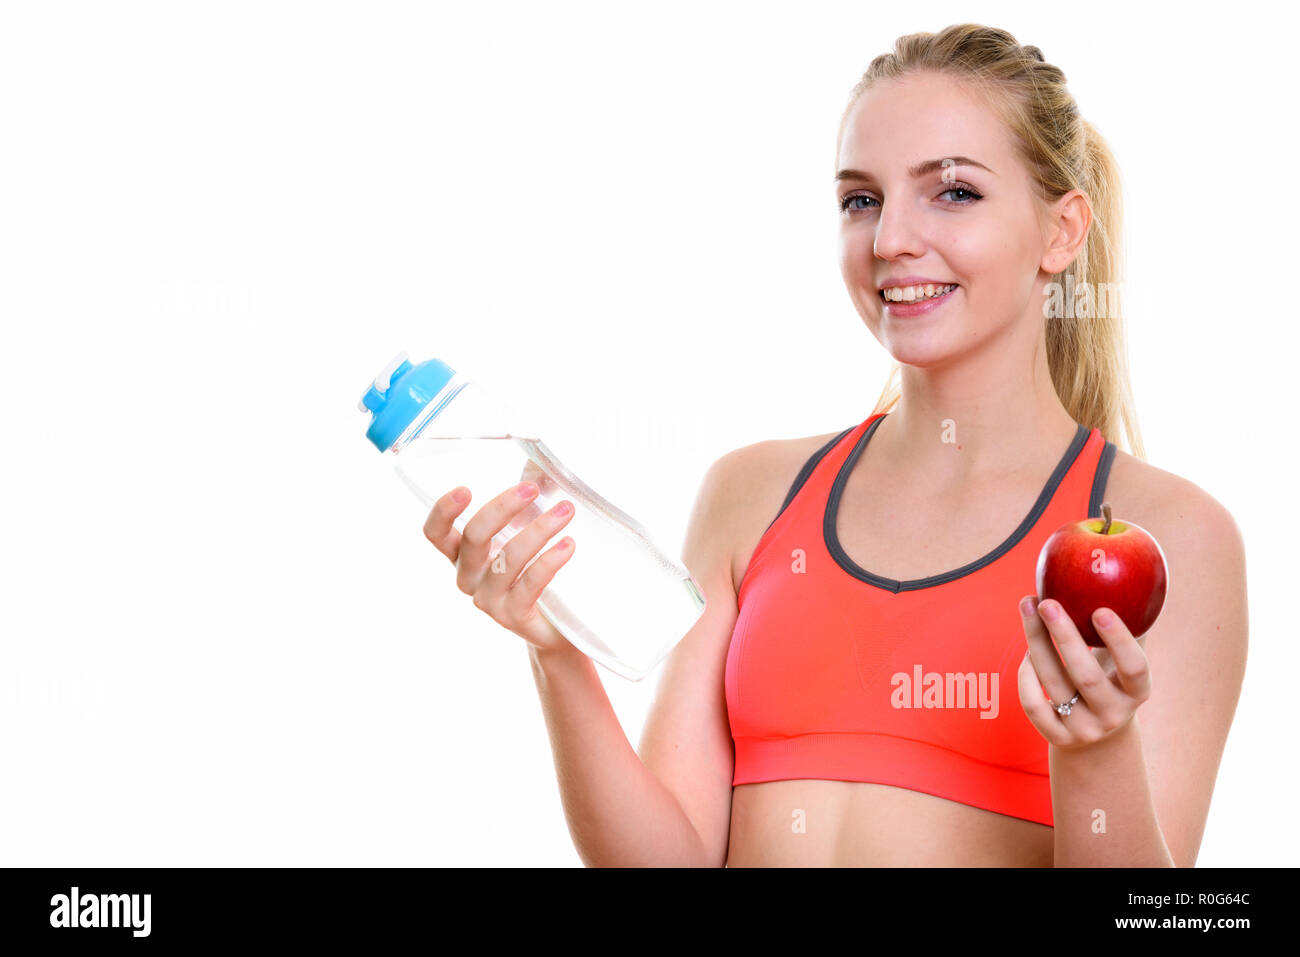 https://c8.alamy.com/comp/R0G64C/young-happy-teenage-girl-smiling-while-holding-water-bottle-and-R0G64C.jpg